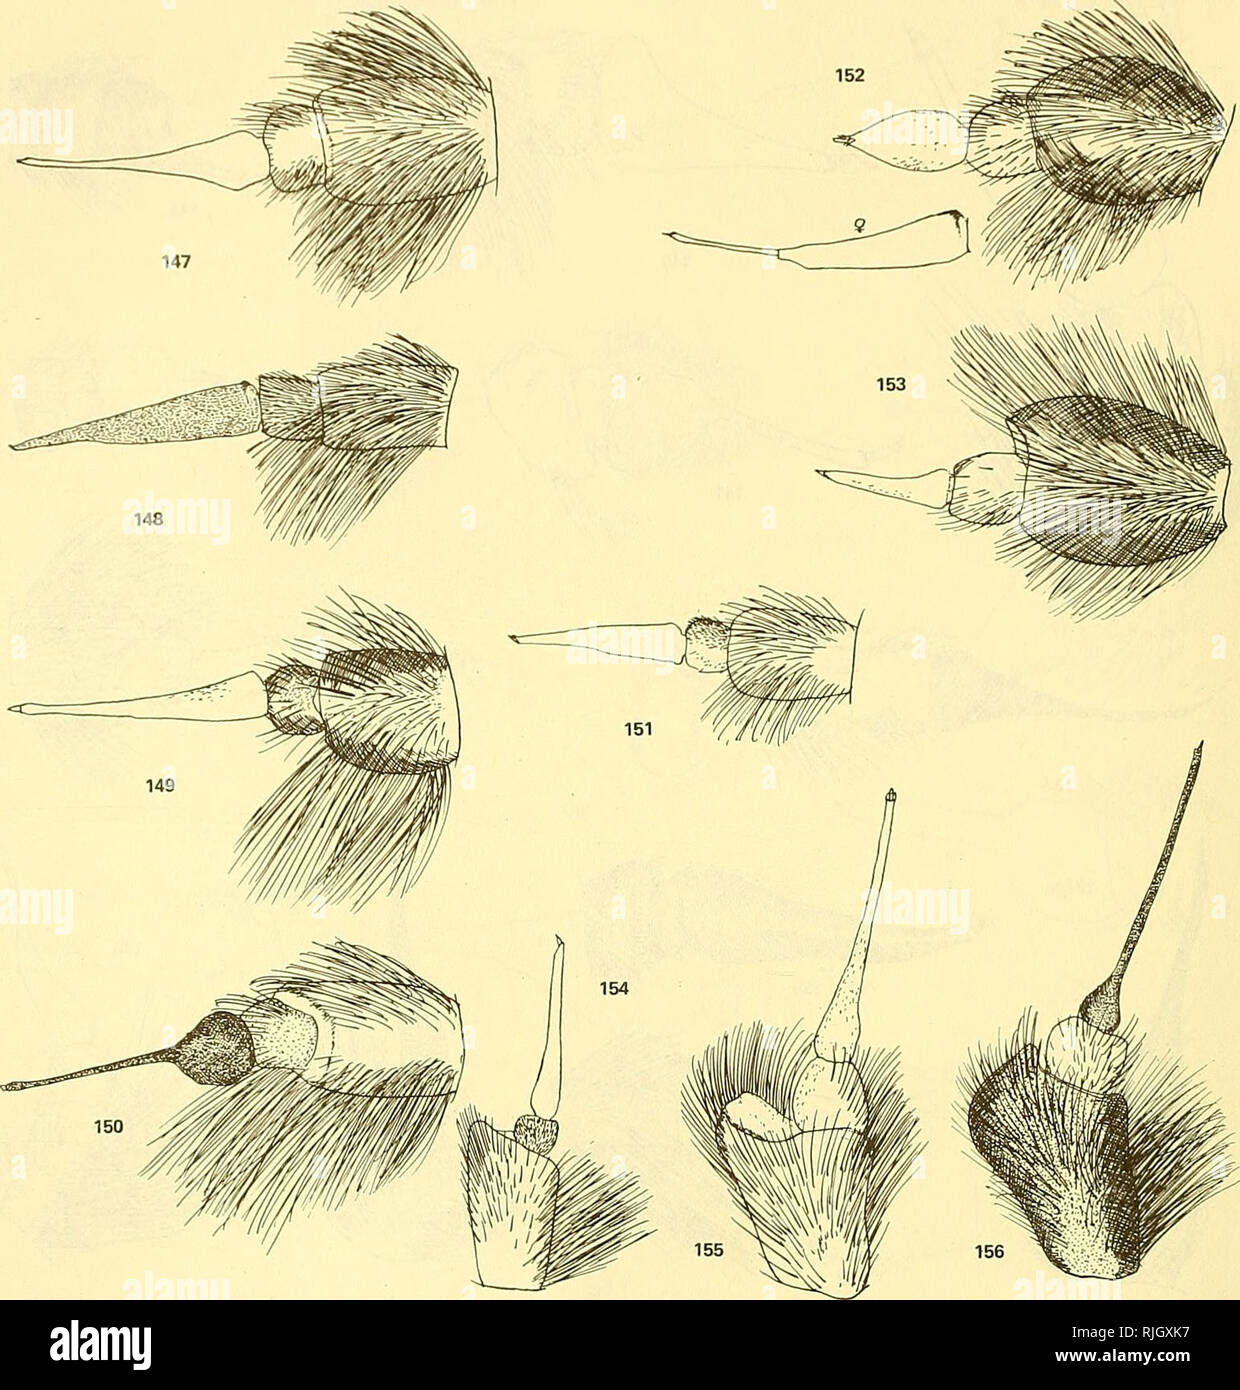 . Bee flies of the world: the genera of the family Bombyliidae. Bombyliidae; Parasites. 476 BEE FLIES OF THE WORLD. Figures 147-156.â147, Lyophlaeba sp. 148, Ylasoia â pegasus Wiedemann. 149, Doddosia picta Edwards. ISO, Comptosia (Paradosia) tendens Walker. 151, Lyophlaeba (Macrocondyla) montdna Philippi. 152, Oncodosia planus Walker, male, female. 153, Onco- dosia planus Walker, dorsal aspect. 154, Lyo- phlaeba (Macrocondyla) montana Philippi, dorsal aspect. 155, Doddosia picta Edwards, dorsal aspect. 156, Comptosia fascipennis Macquart, dorsal aspect.. Please note that these images are extr Stock Photo